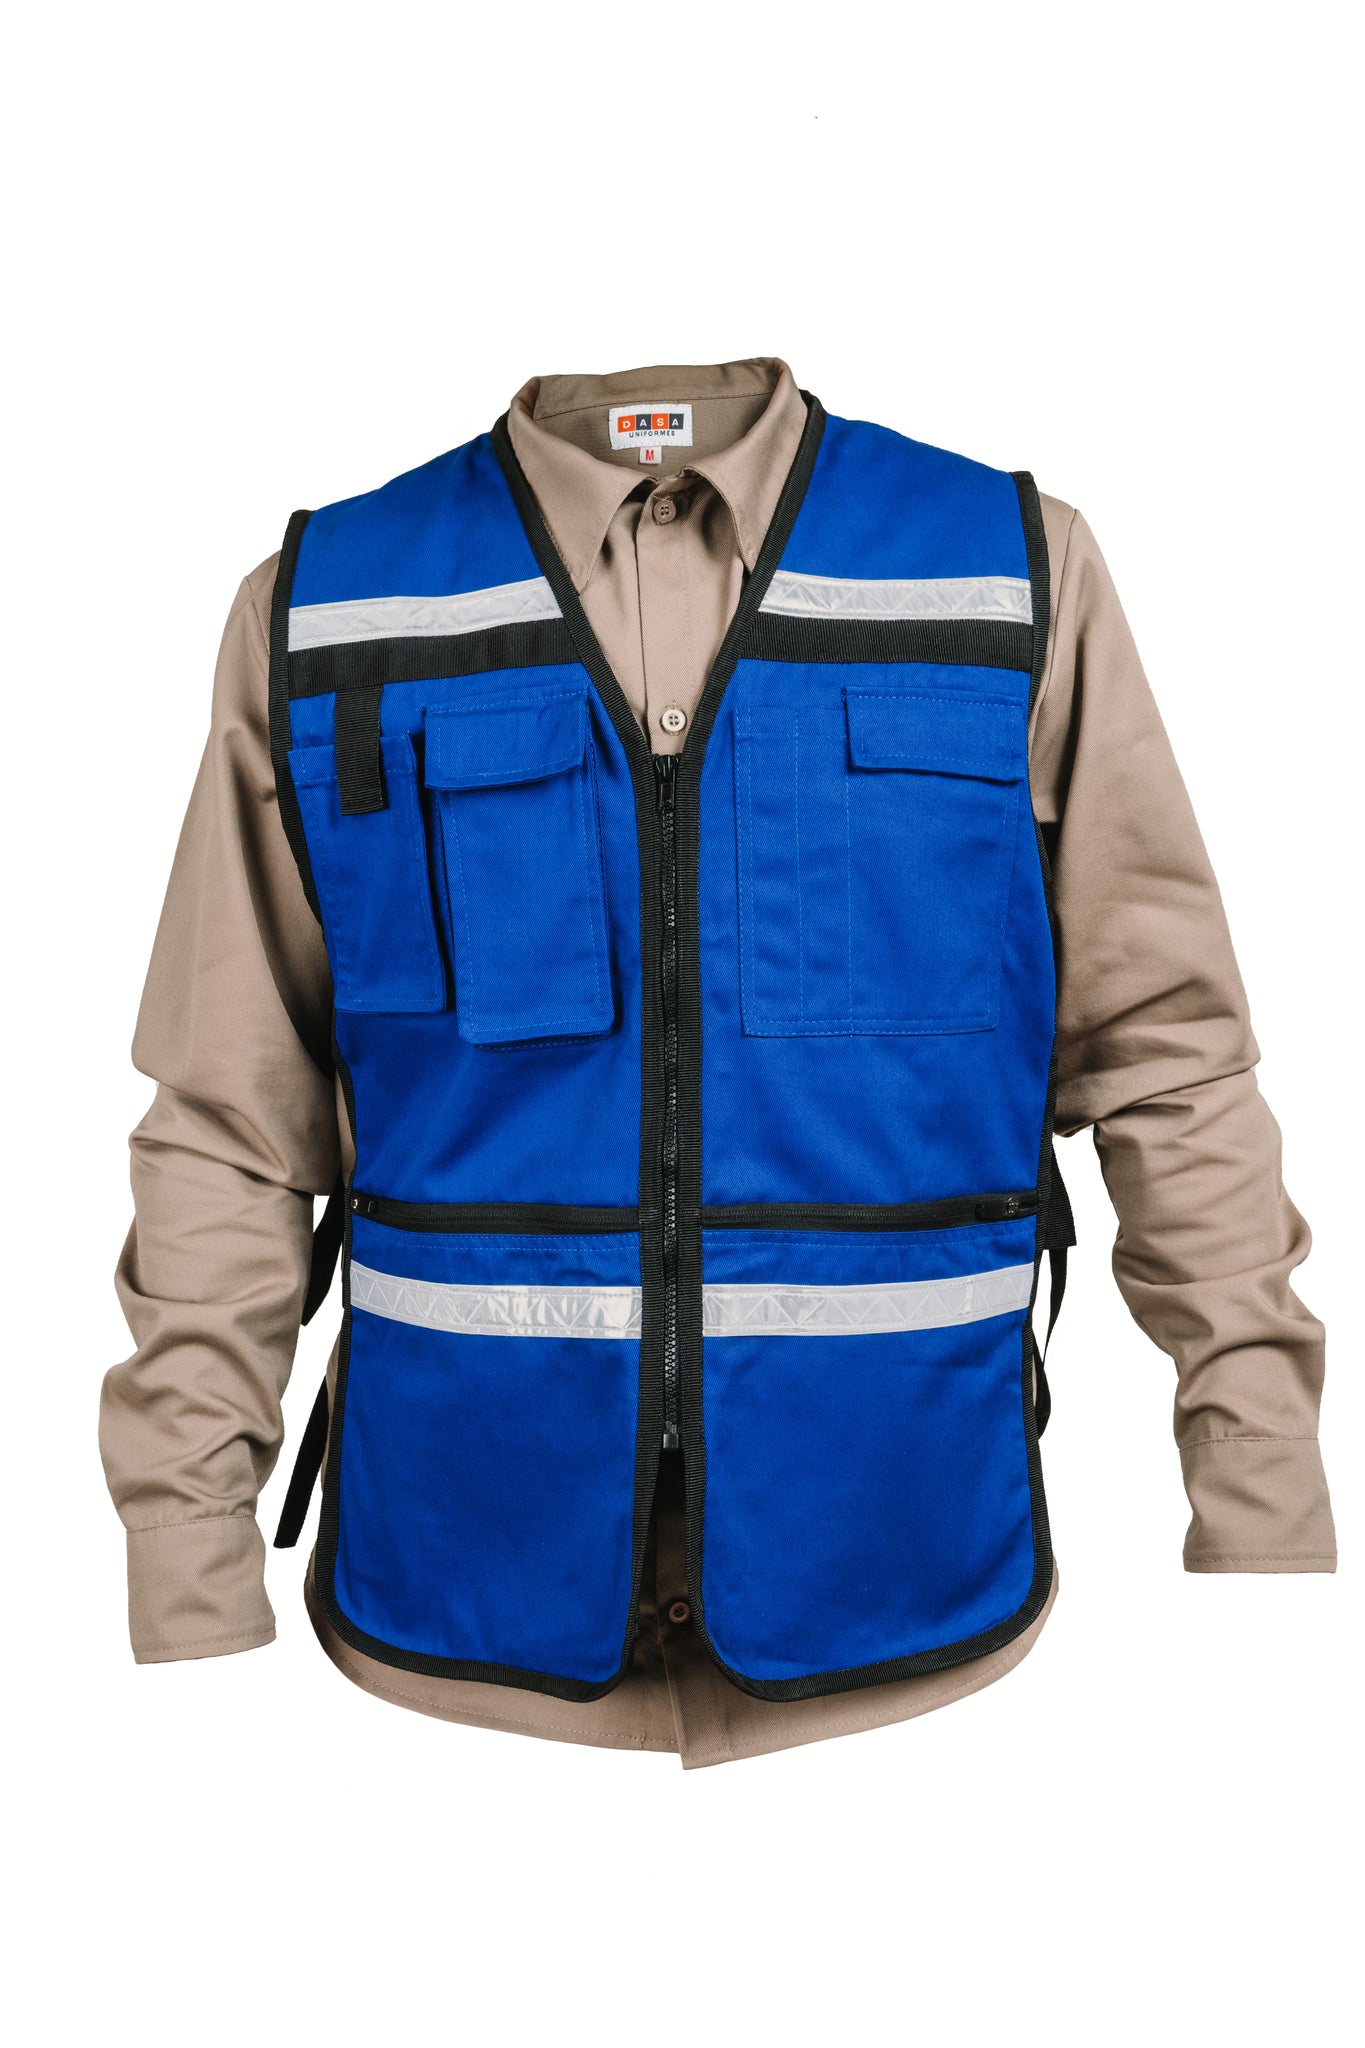 Chemical Protection - Lakeland Industries Global PPE